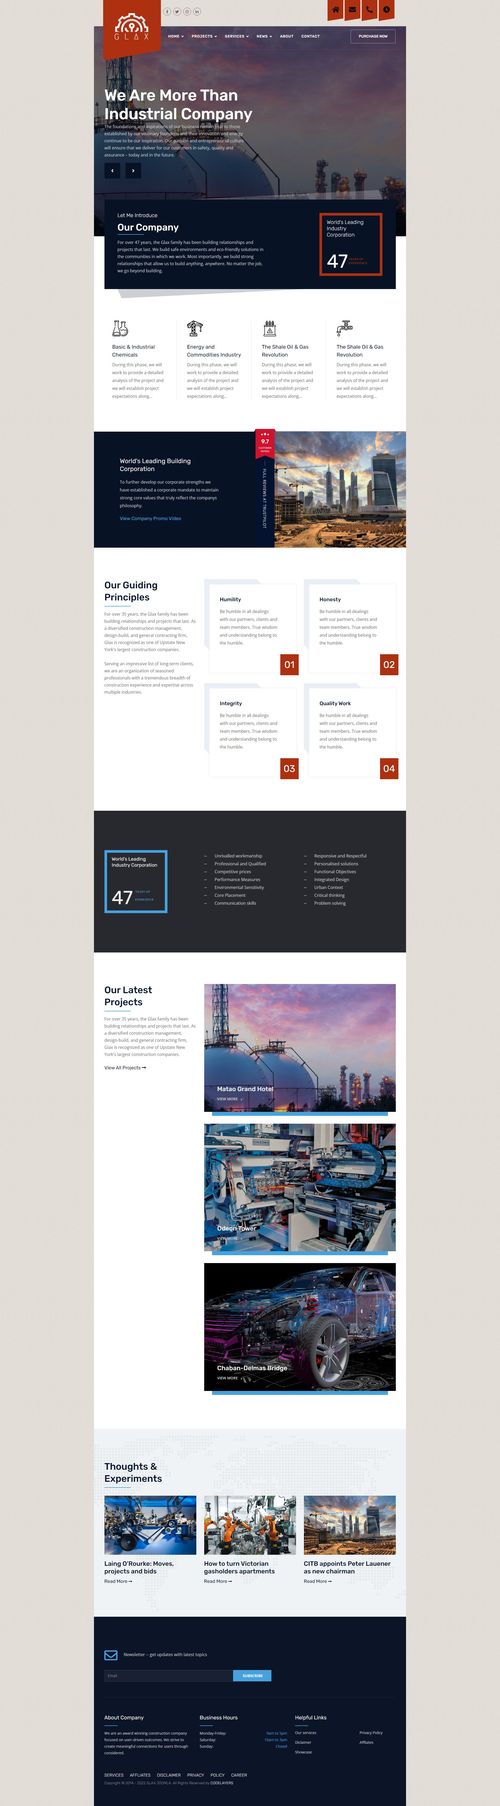 Glax - Joomla 4 Template Modern Industry and Construction